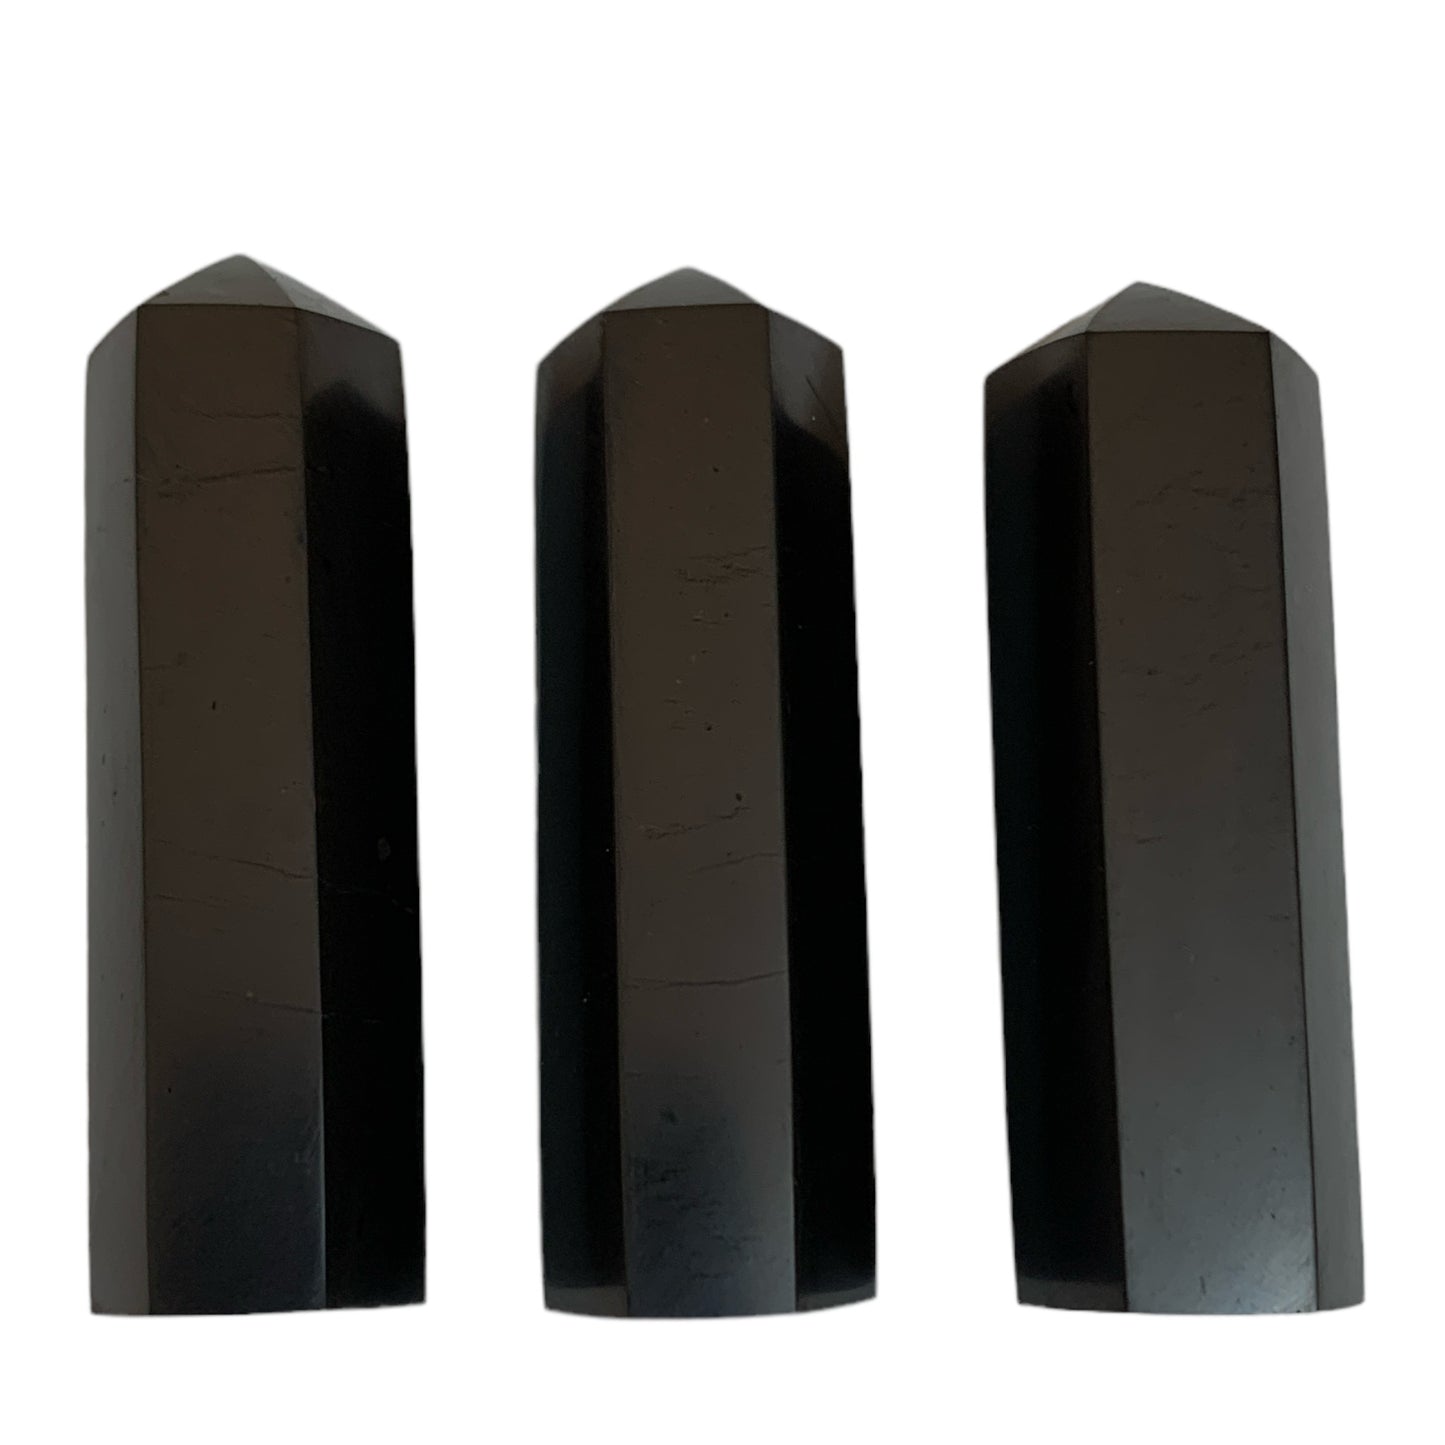 Shungite - Polished Obelisk Faceted - 1.5 x 5cm tall - NEW121